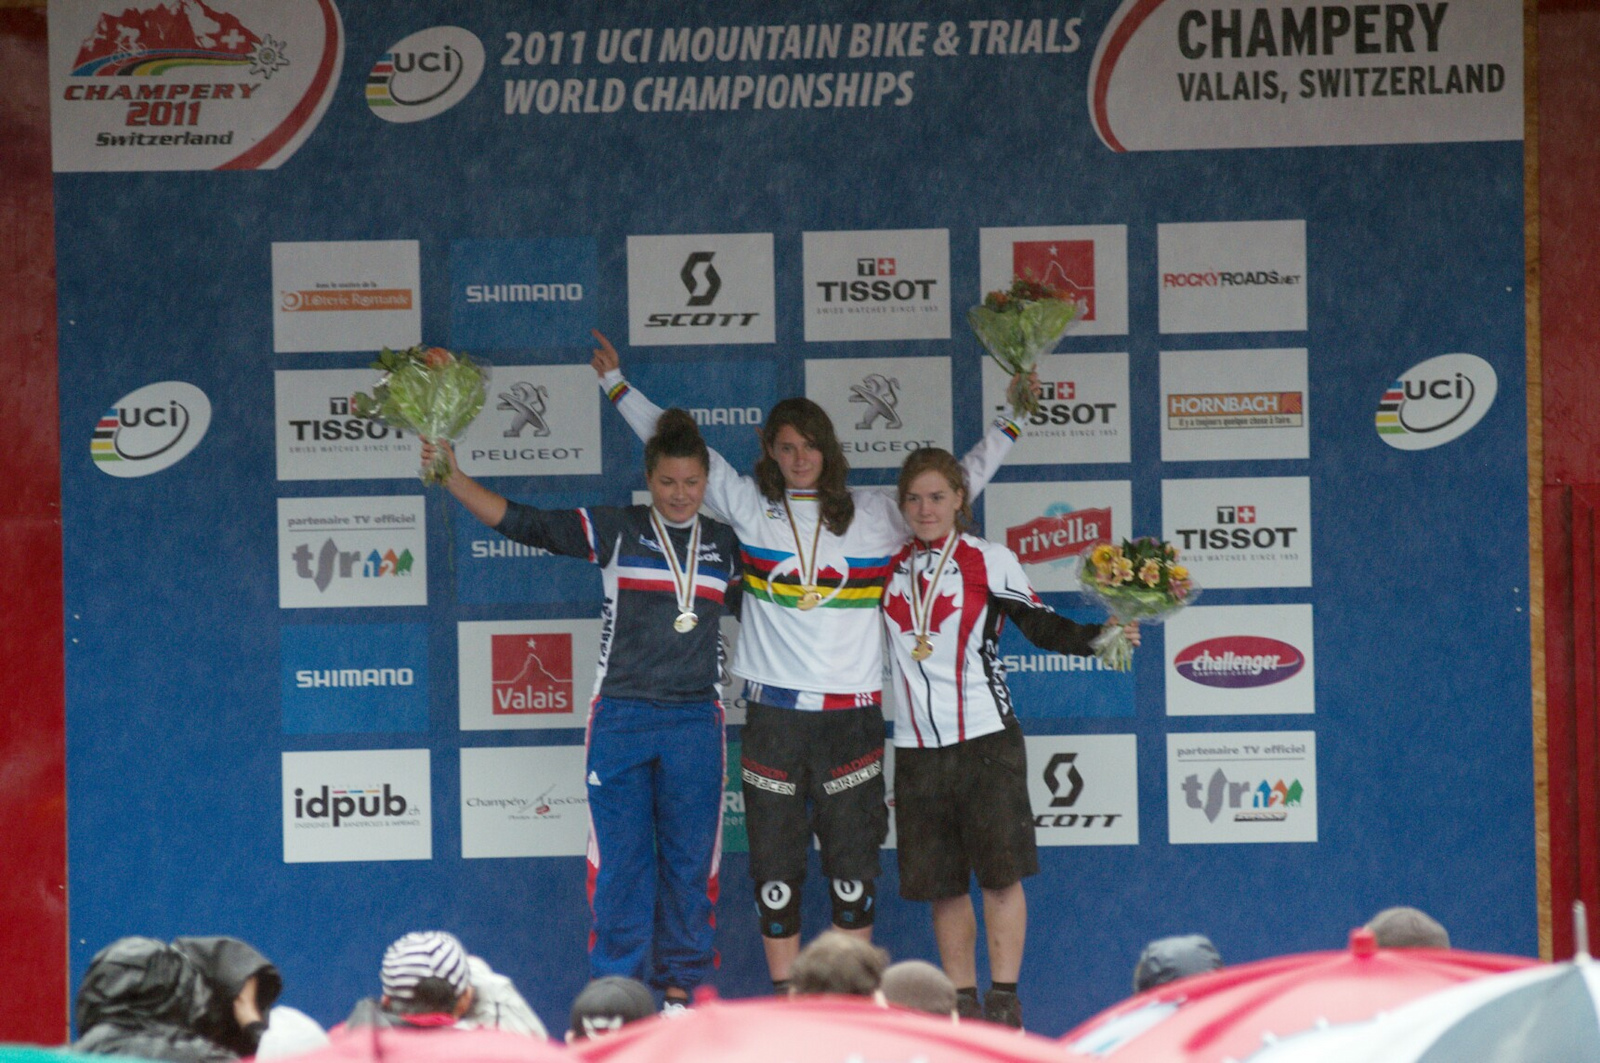 Manon took the gold at this years WChamps in Champery, here are a few photos from the week...